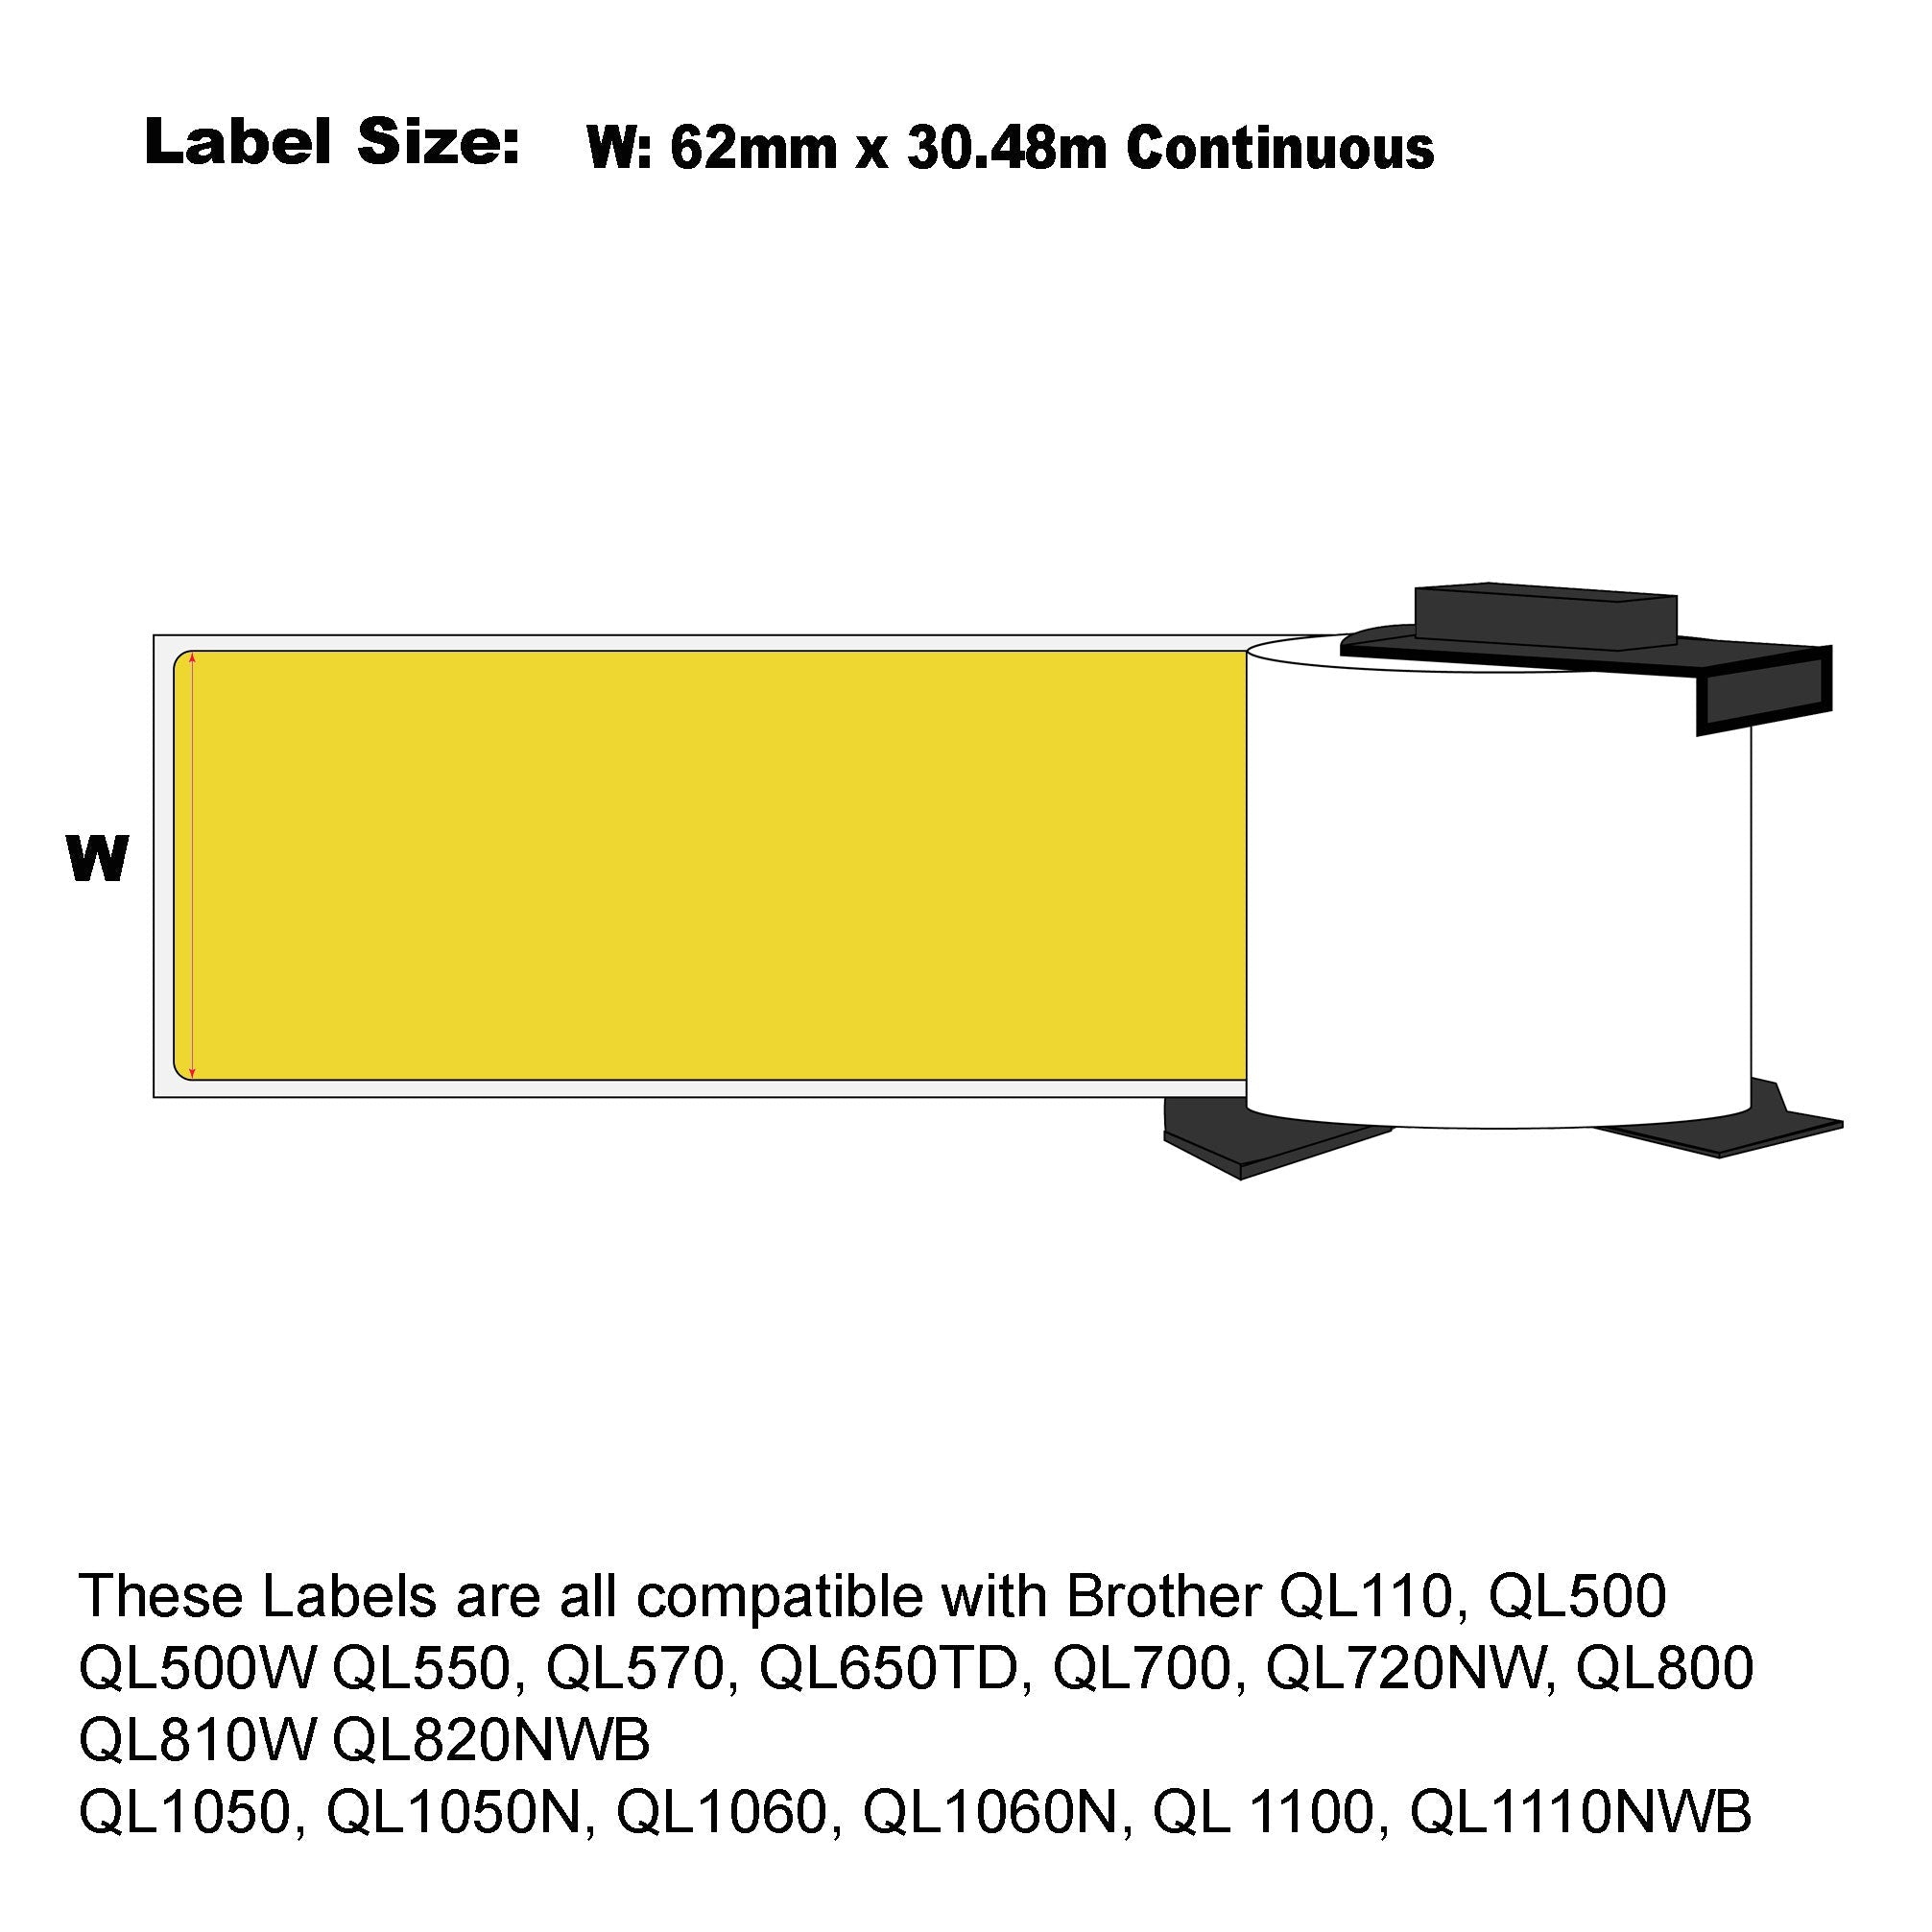 24x Compatible Brother DK-44605 Yellow Labels Continuous Length 62mm x 30.48m